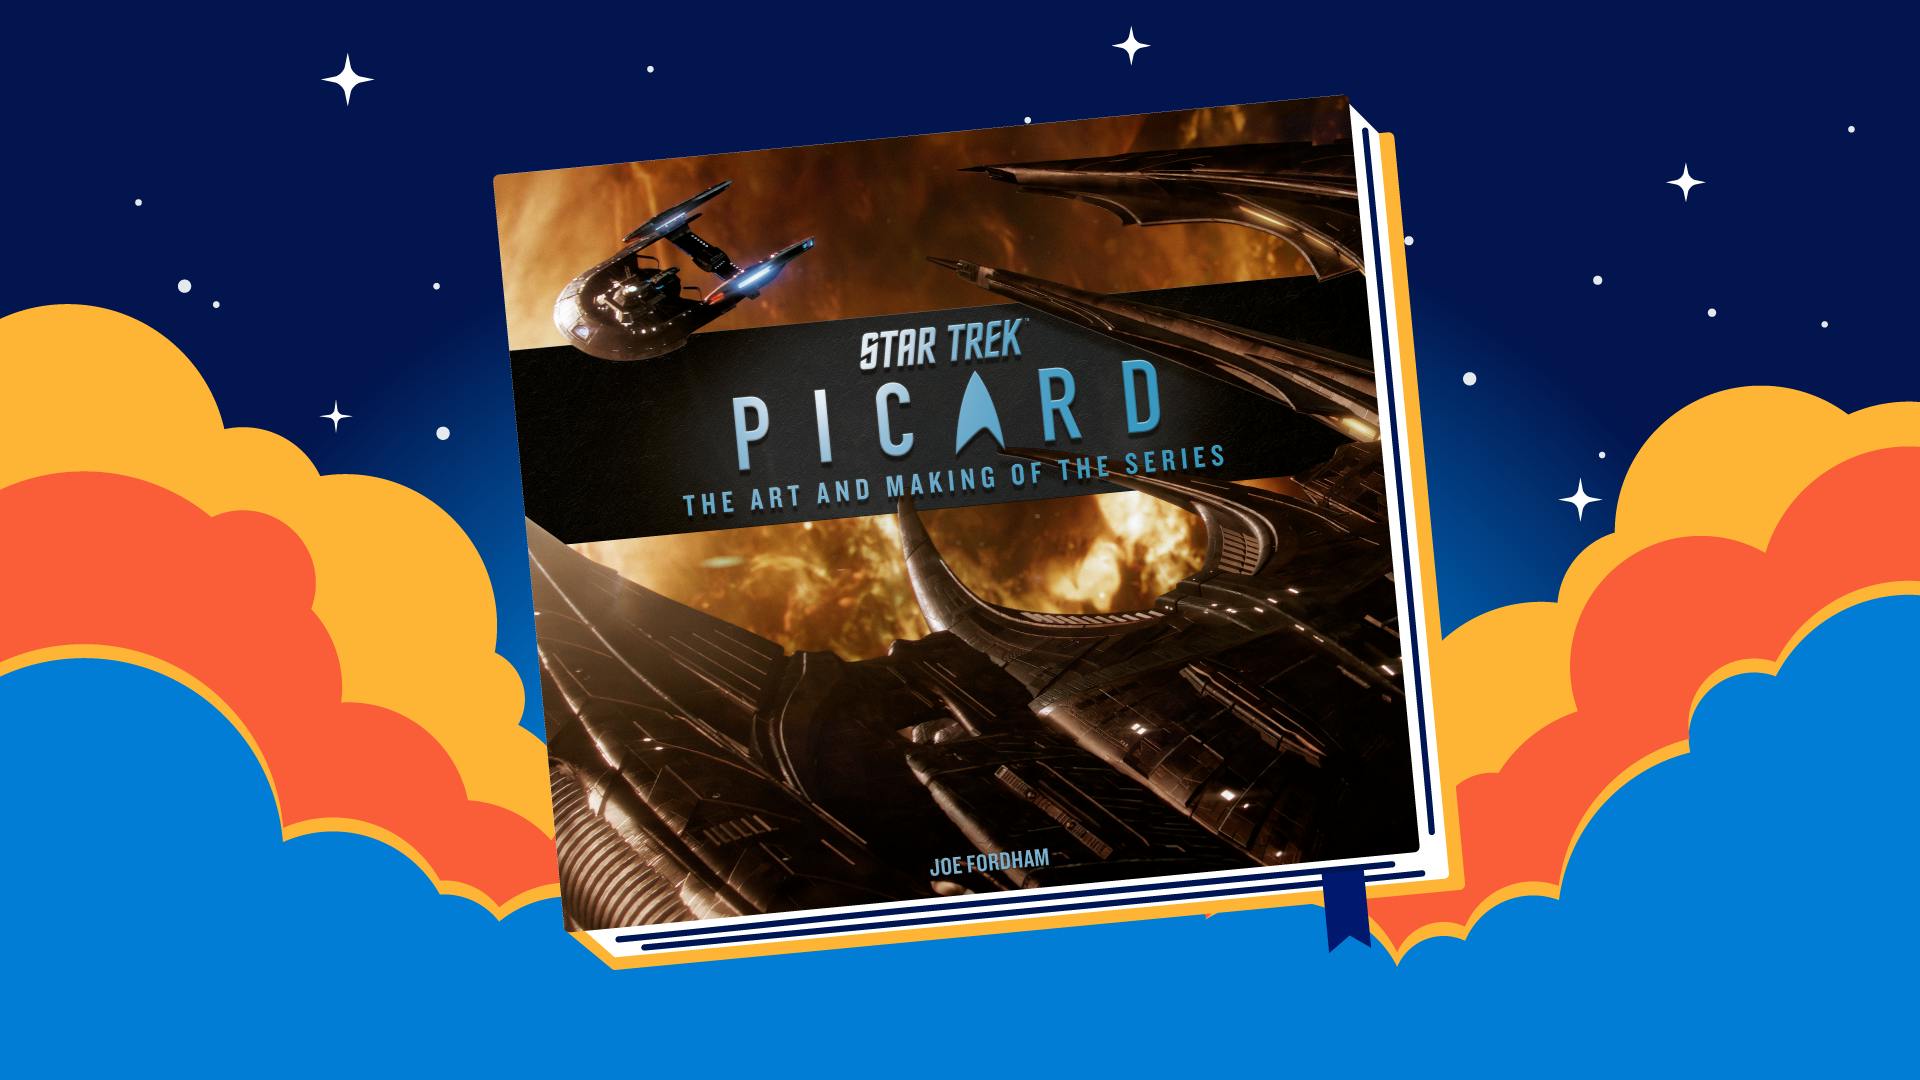 Star Trek: Picard: The Art and Making of the Series book cover